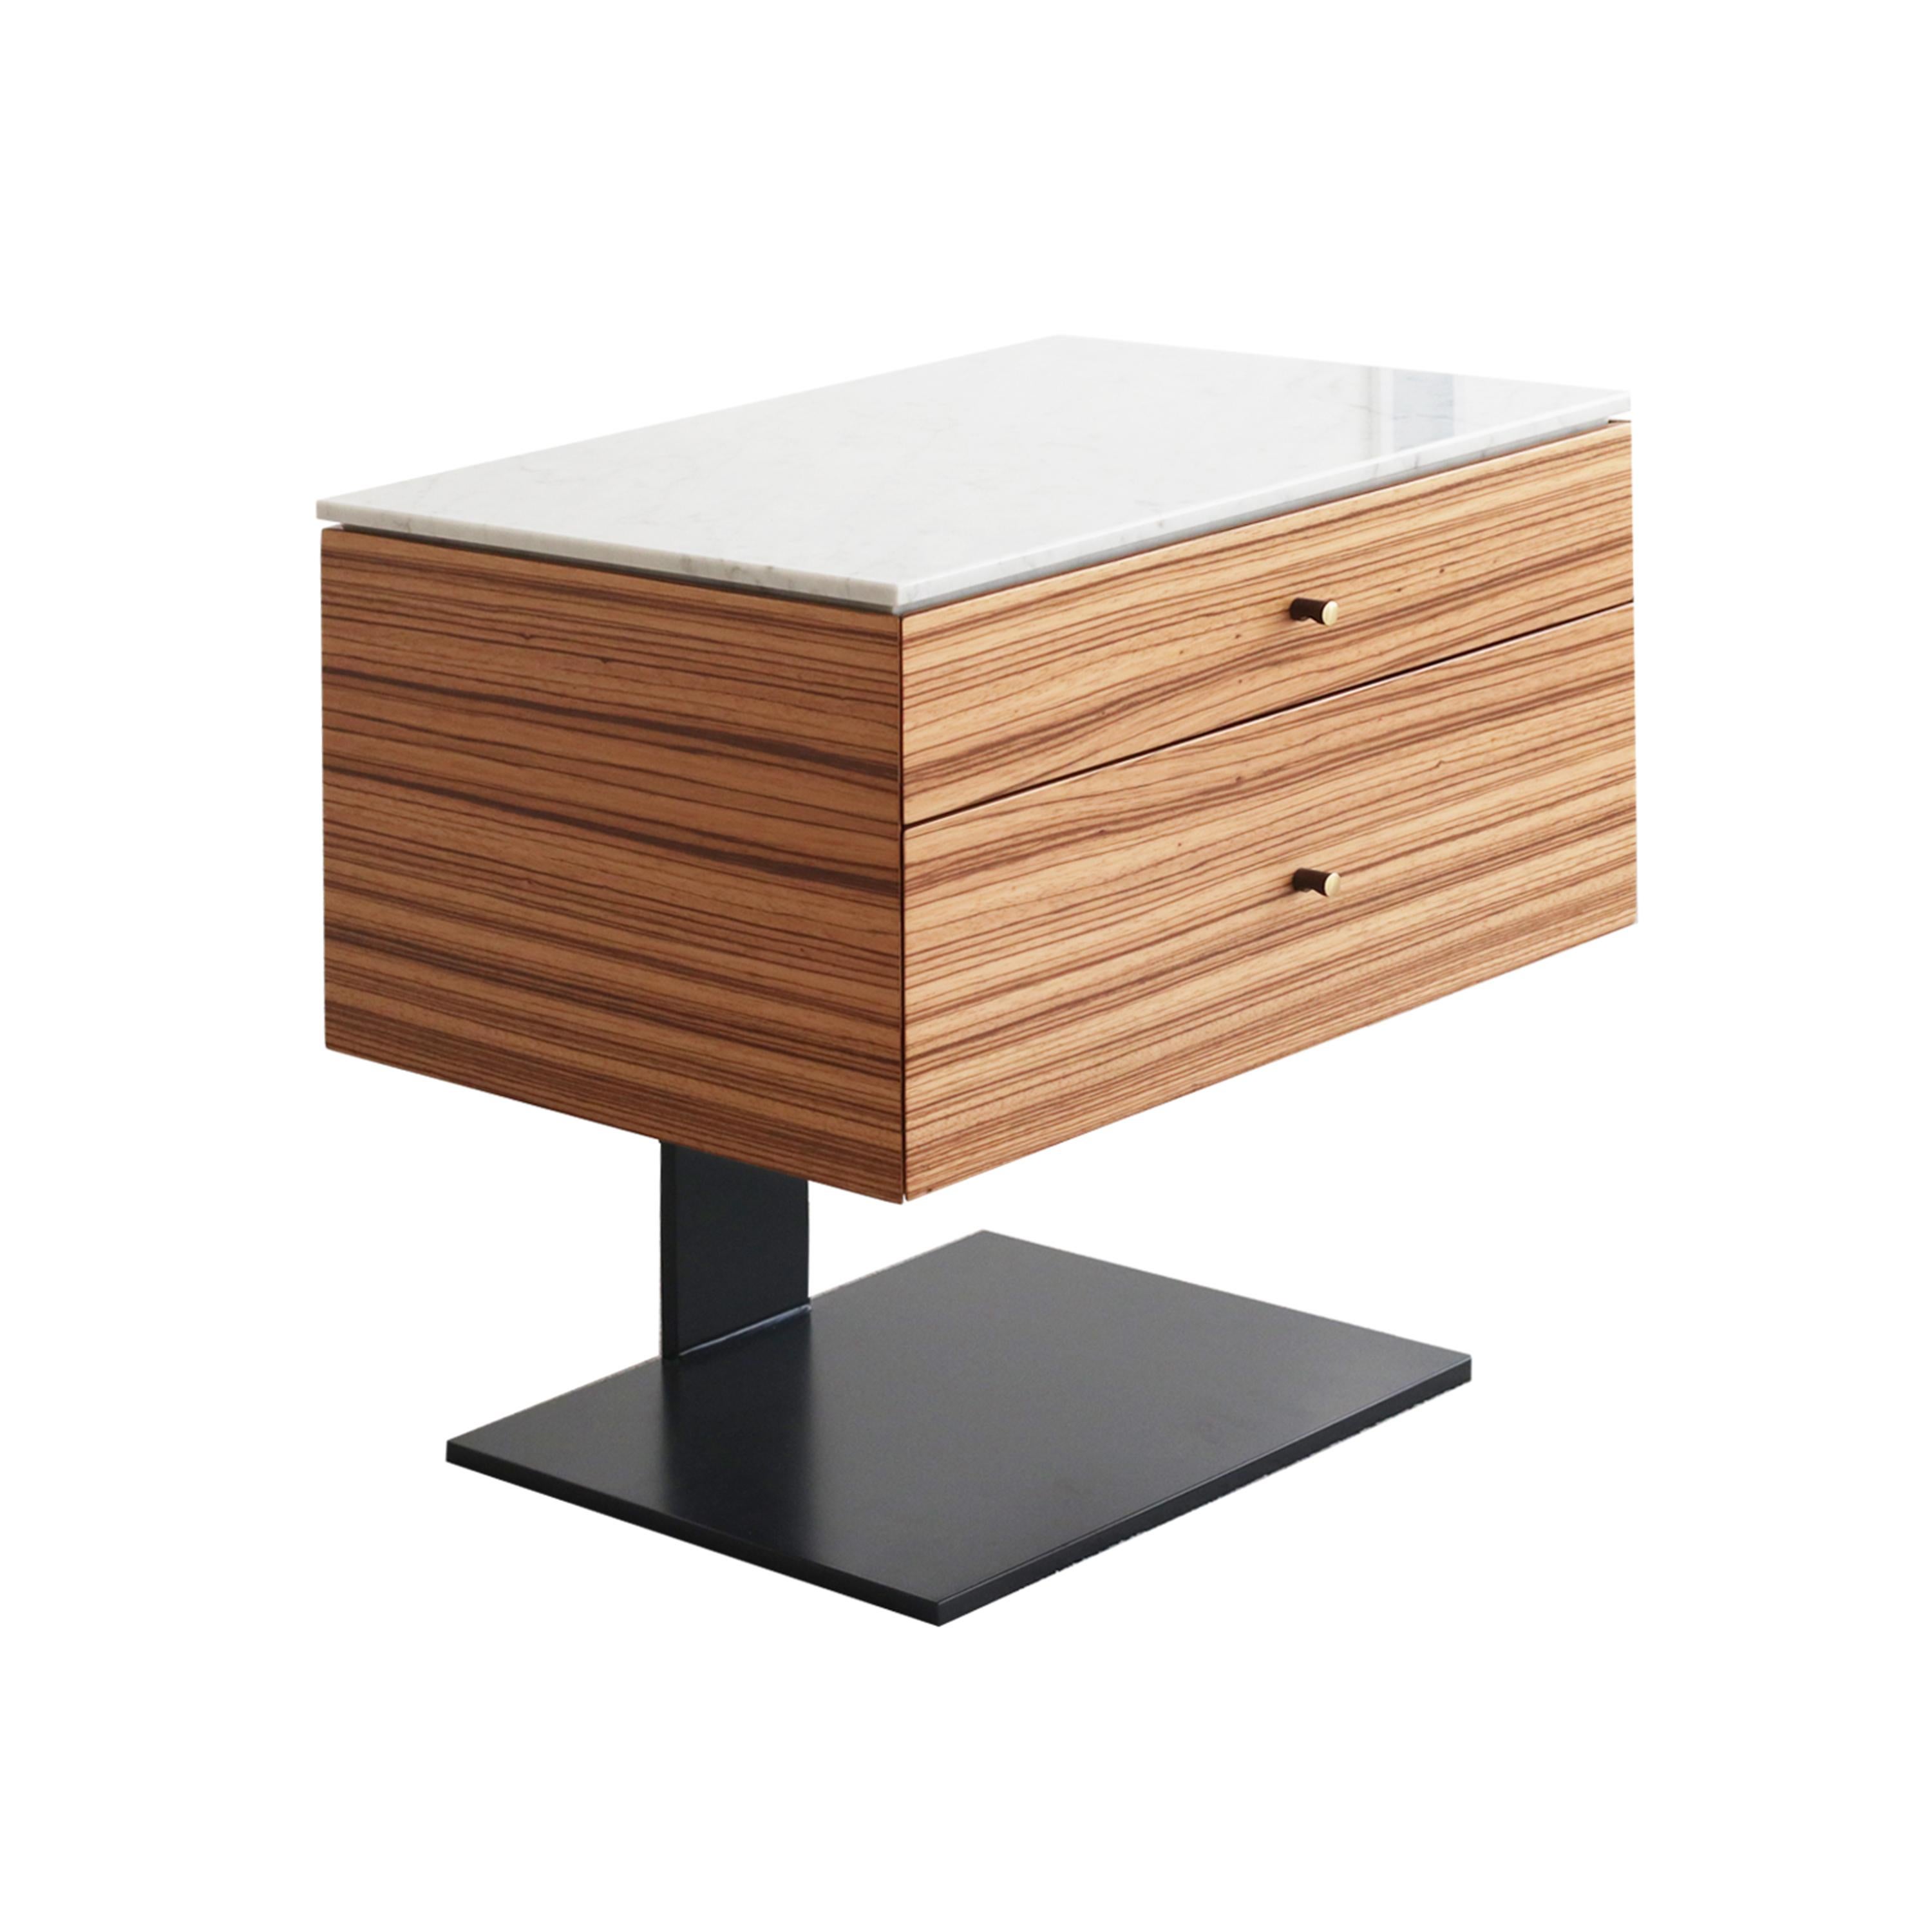 As with all our furniture, this bedside table is made to order and is therefore highly customisable, including in size and finish. The customisation fee is only 10%, which is added to the retail price.

This smartly proportioned two-drawer bedside